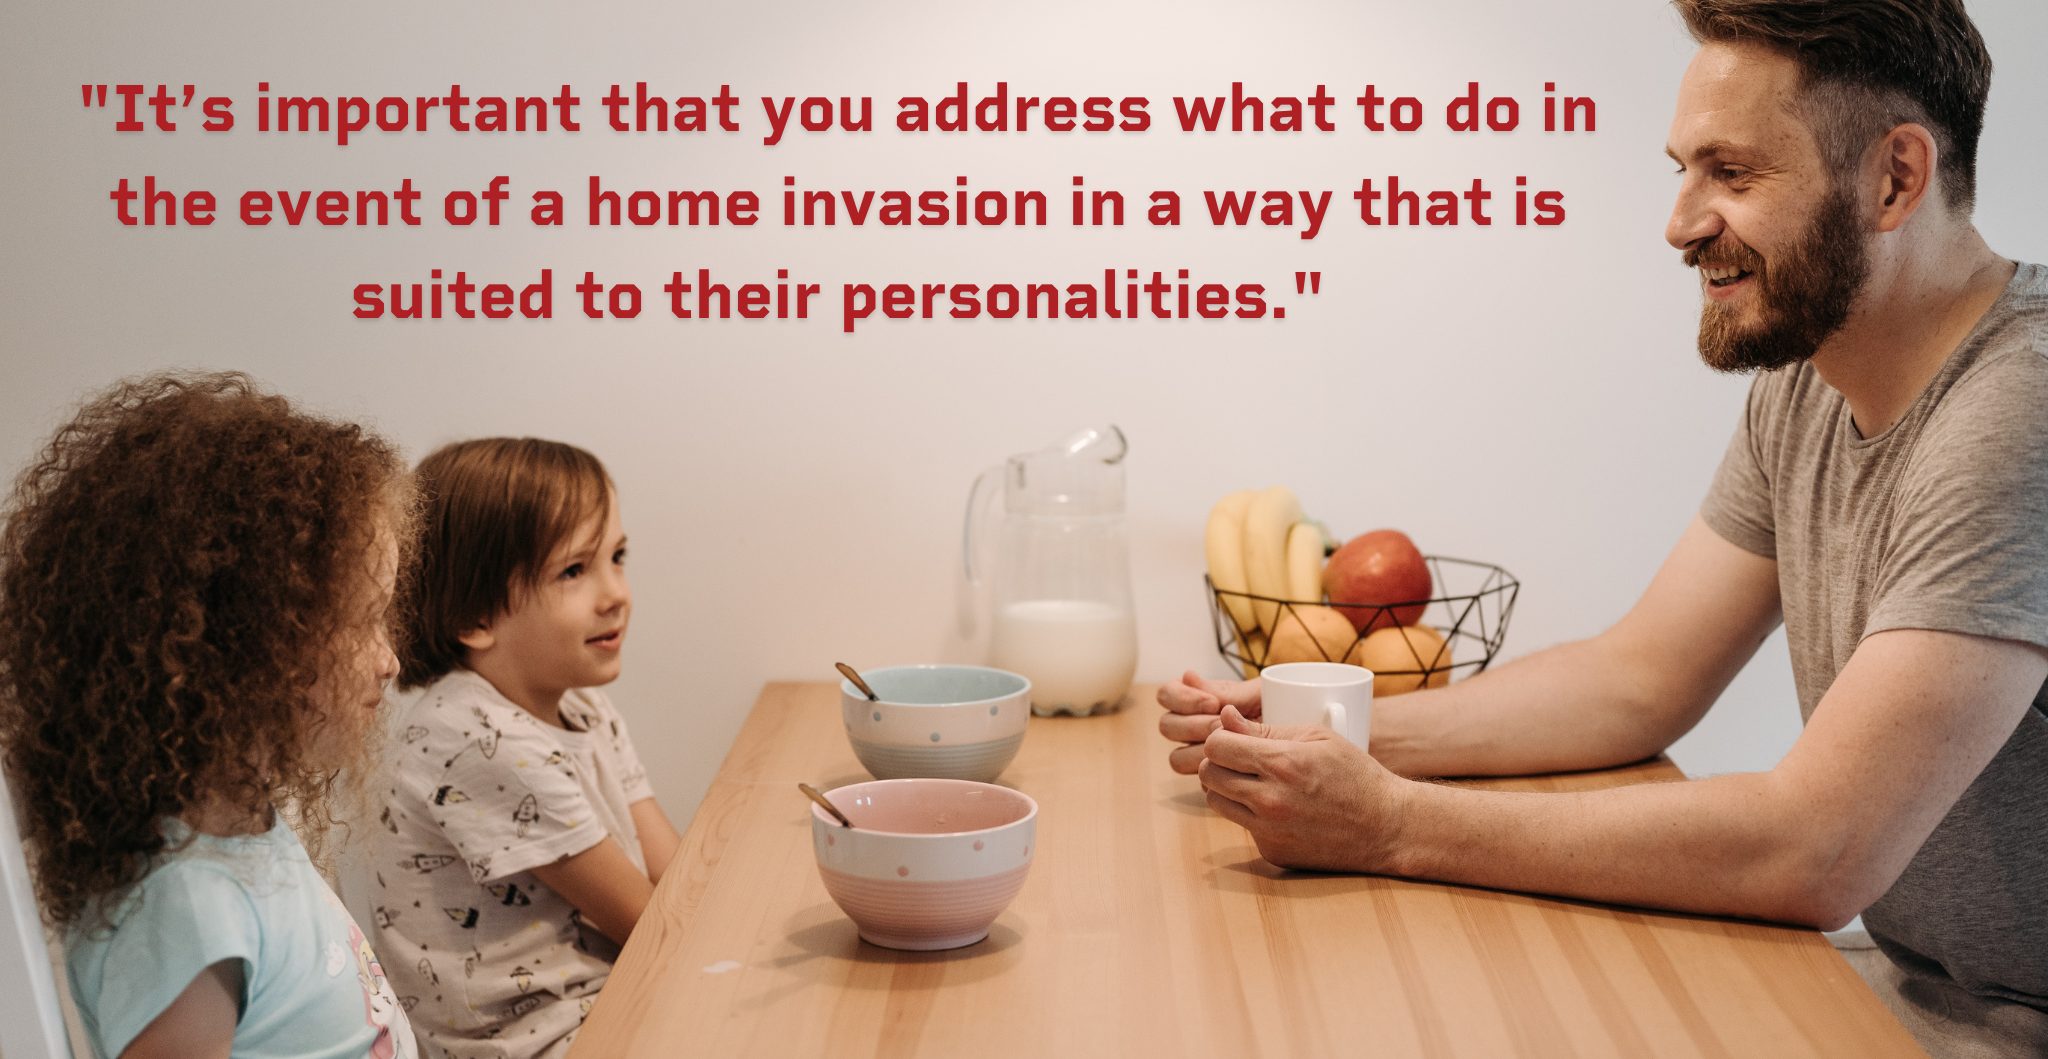 talk to kids about home invasion and what to do to stay safe